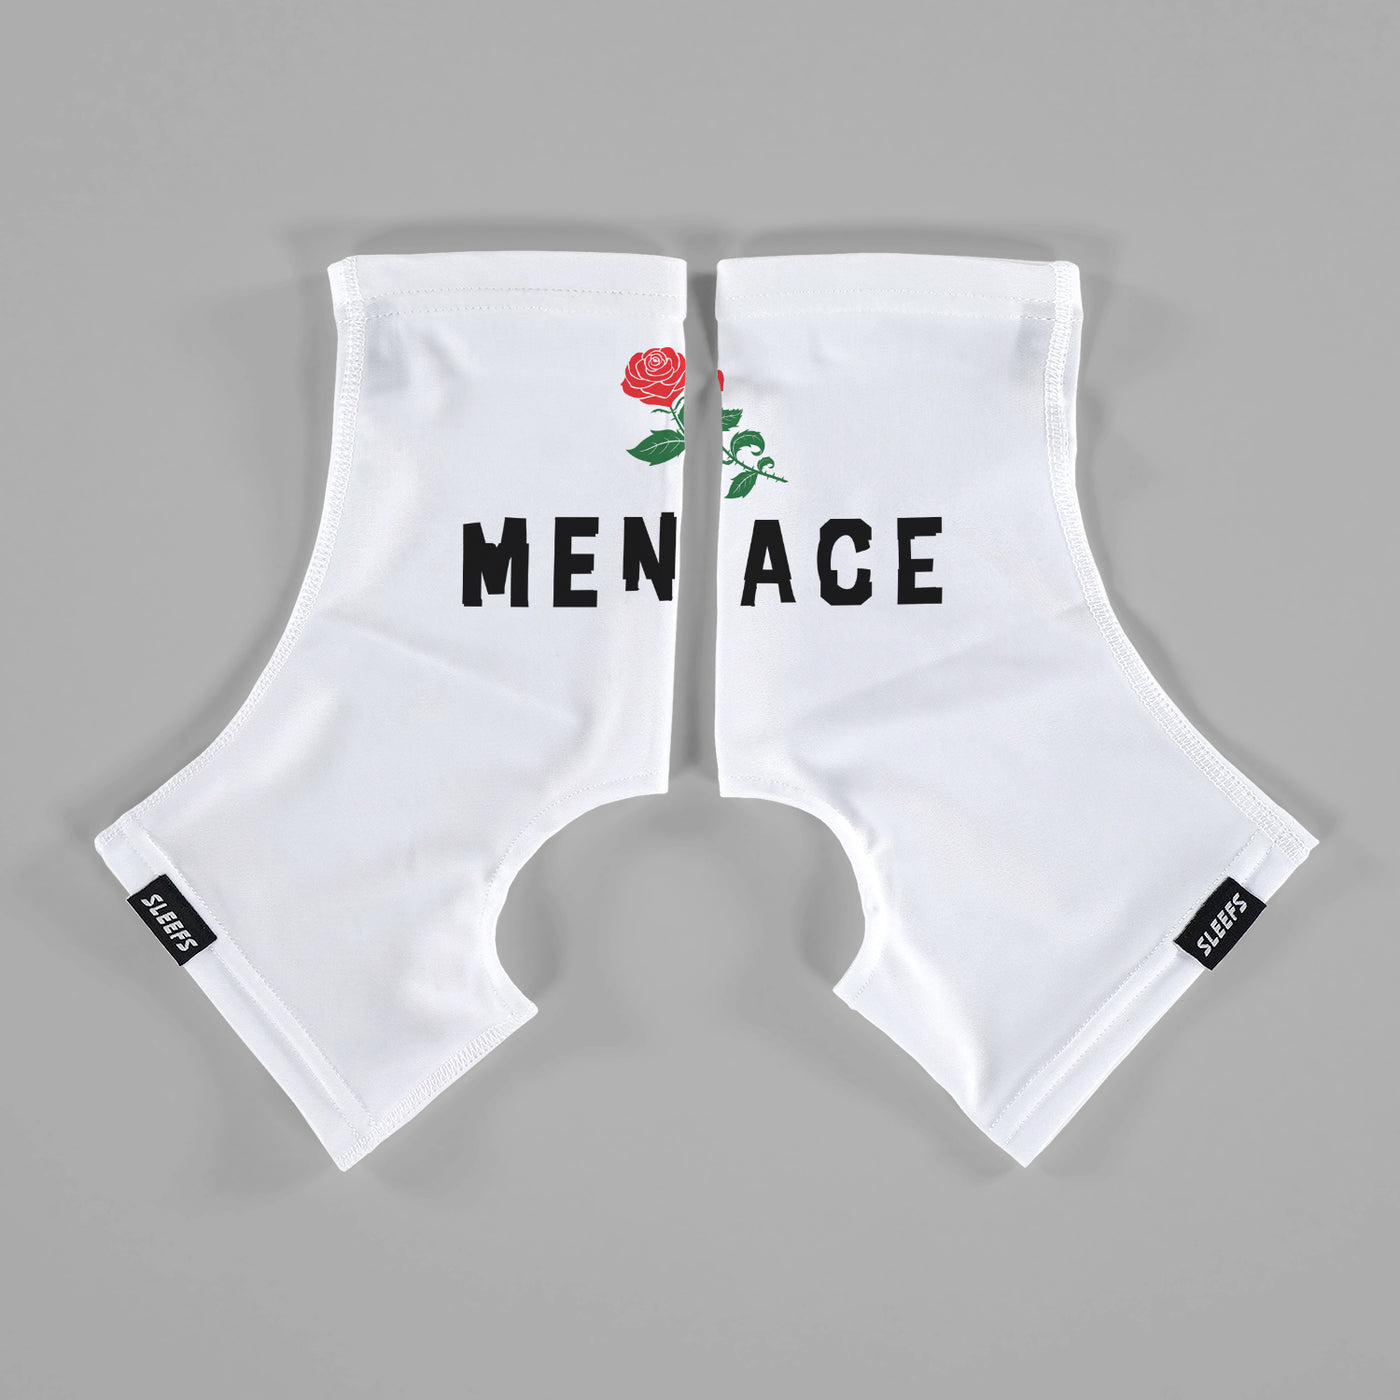 Menace Spats / Cleat Covers